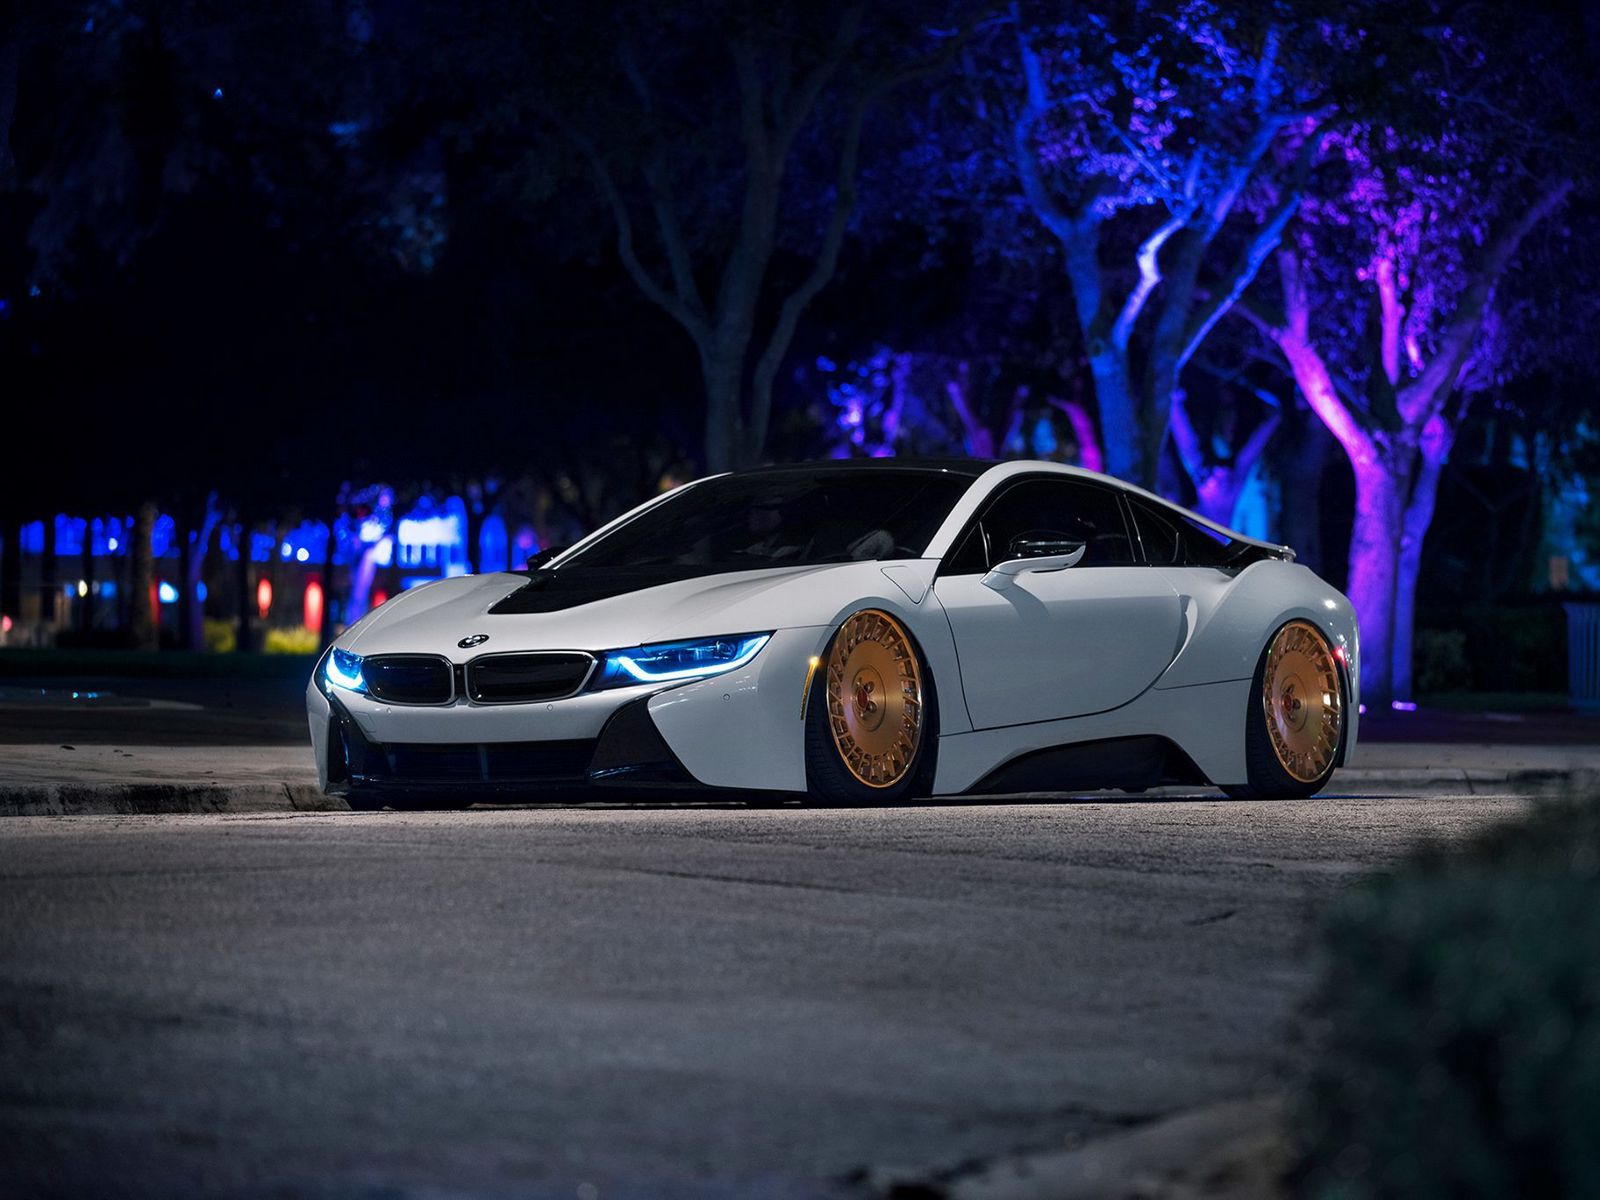 Download wallpaper 1600x1200 bmw, i8, white, side view standard 4:3 hd  background